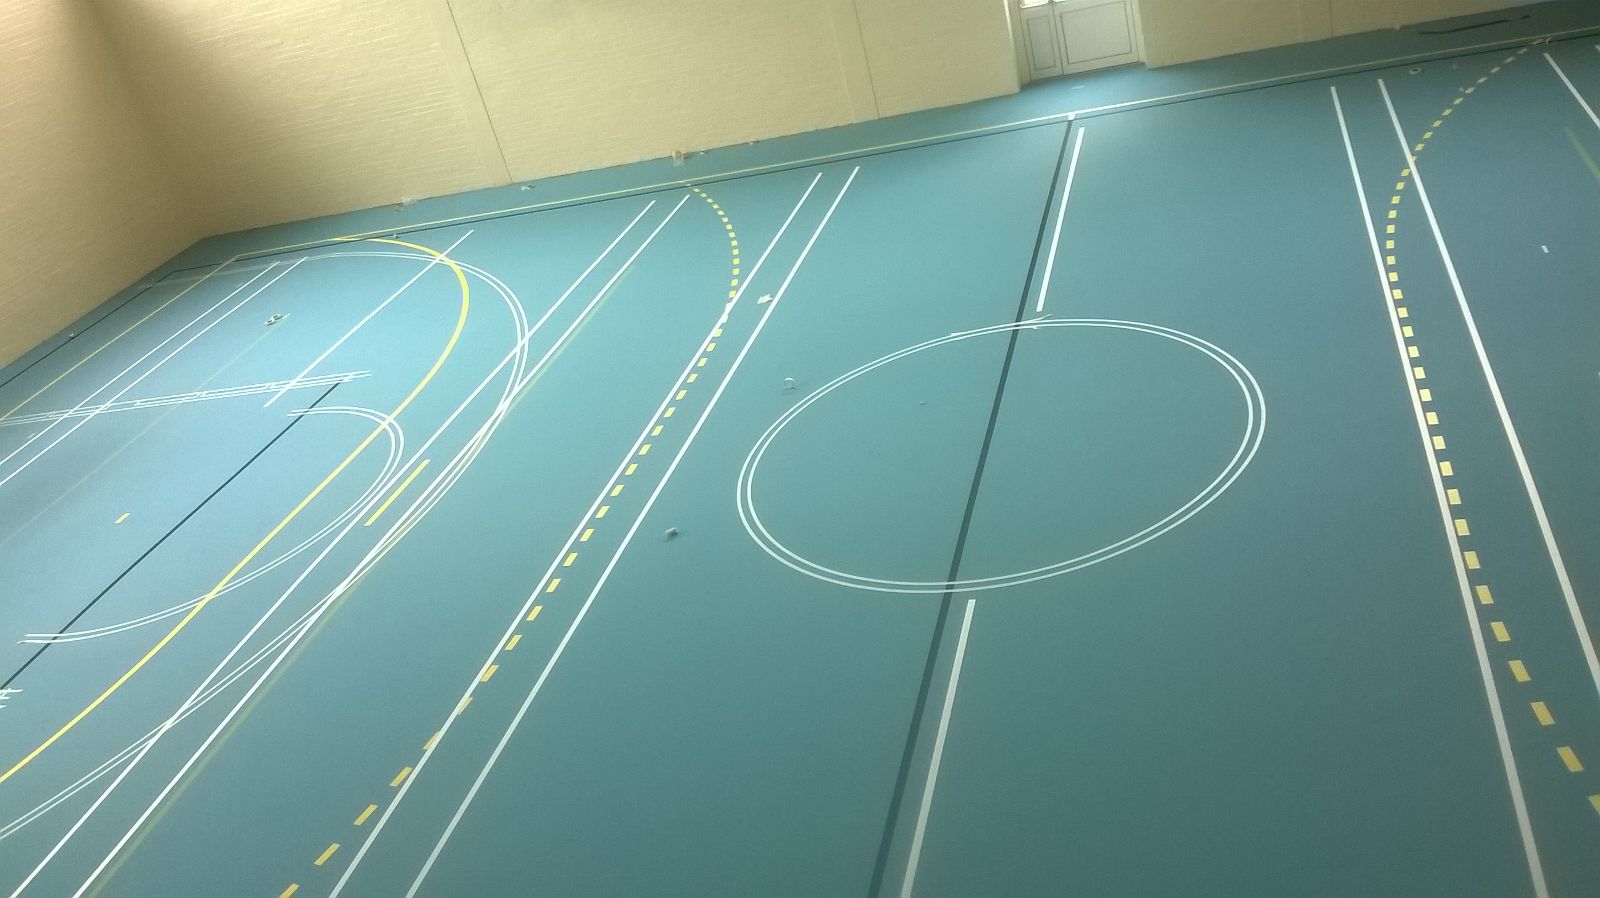 Installation of Pulastic Sports hall floor with court markings by Sports Surfaces UK